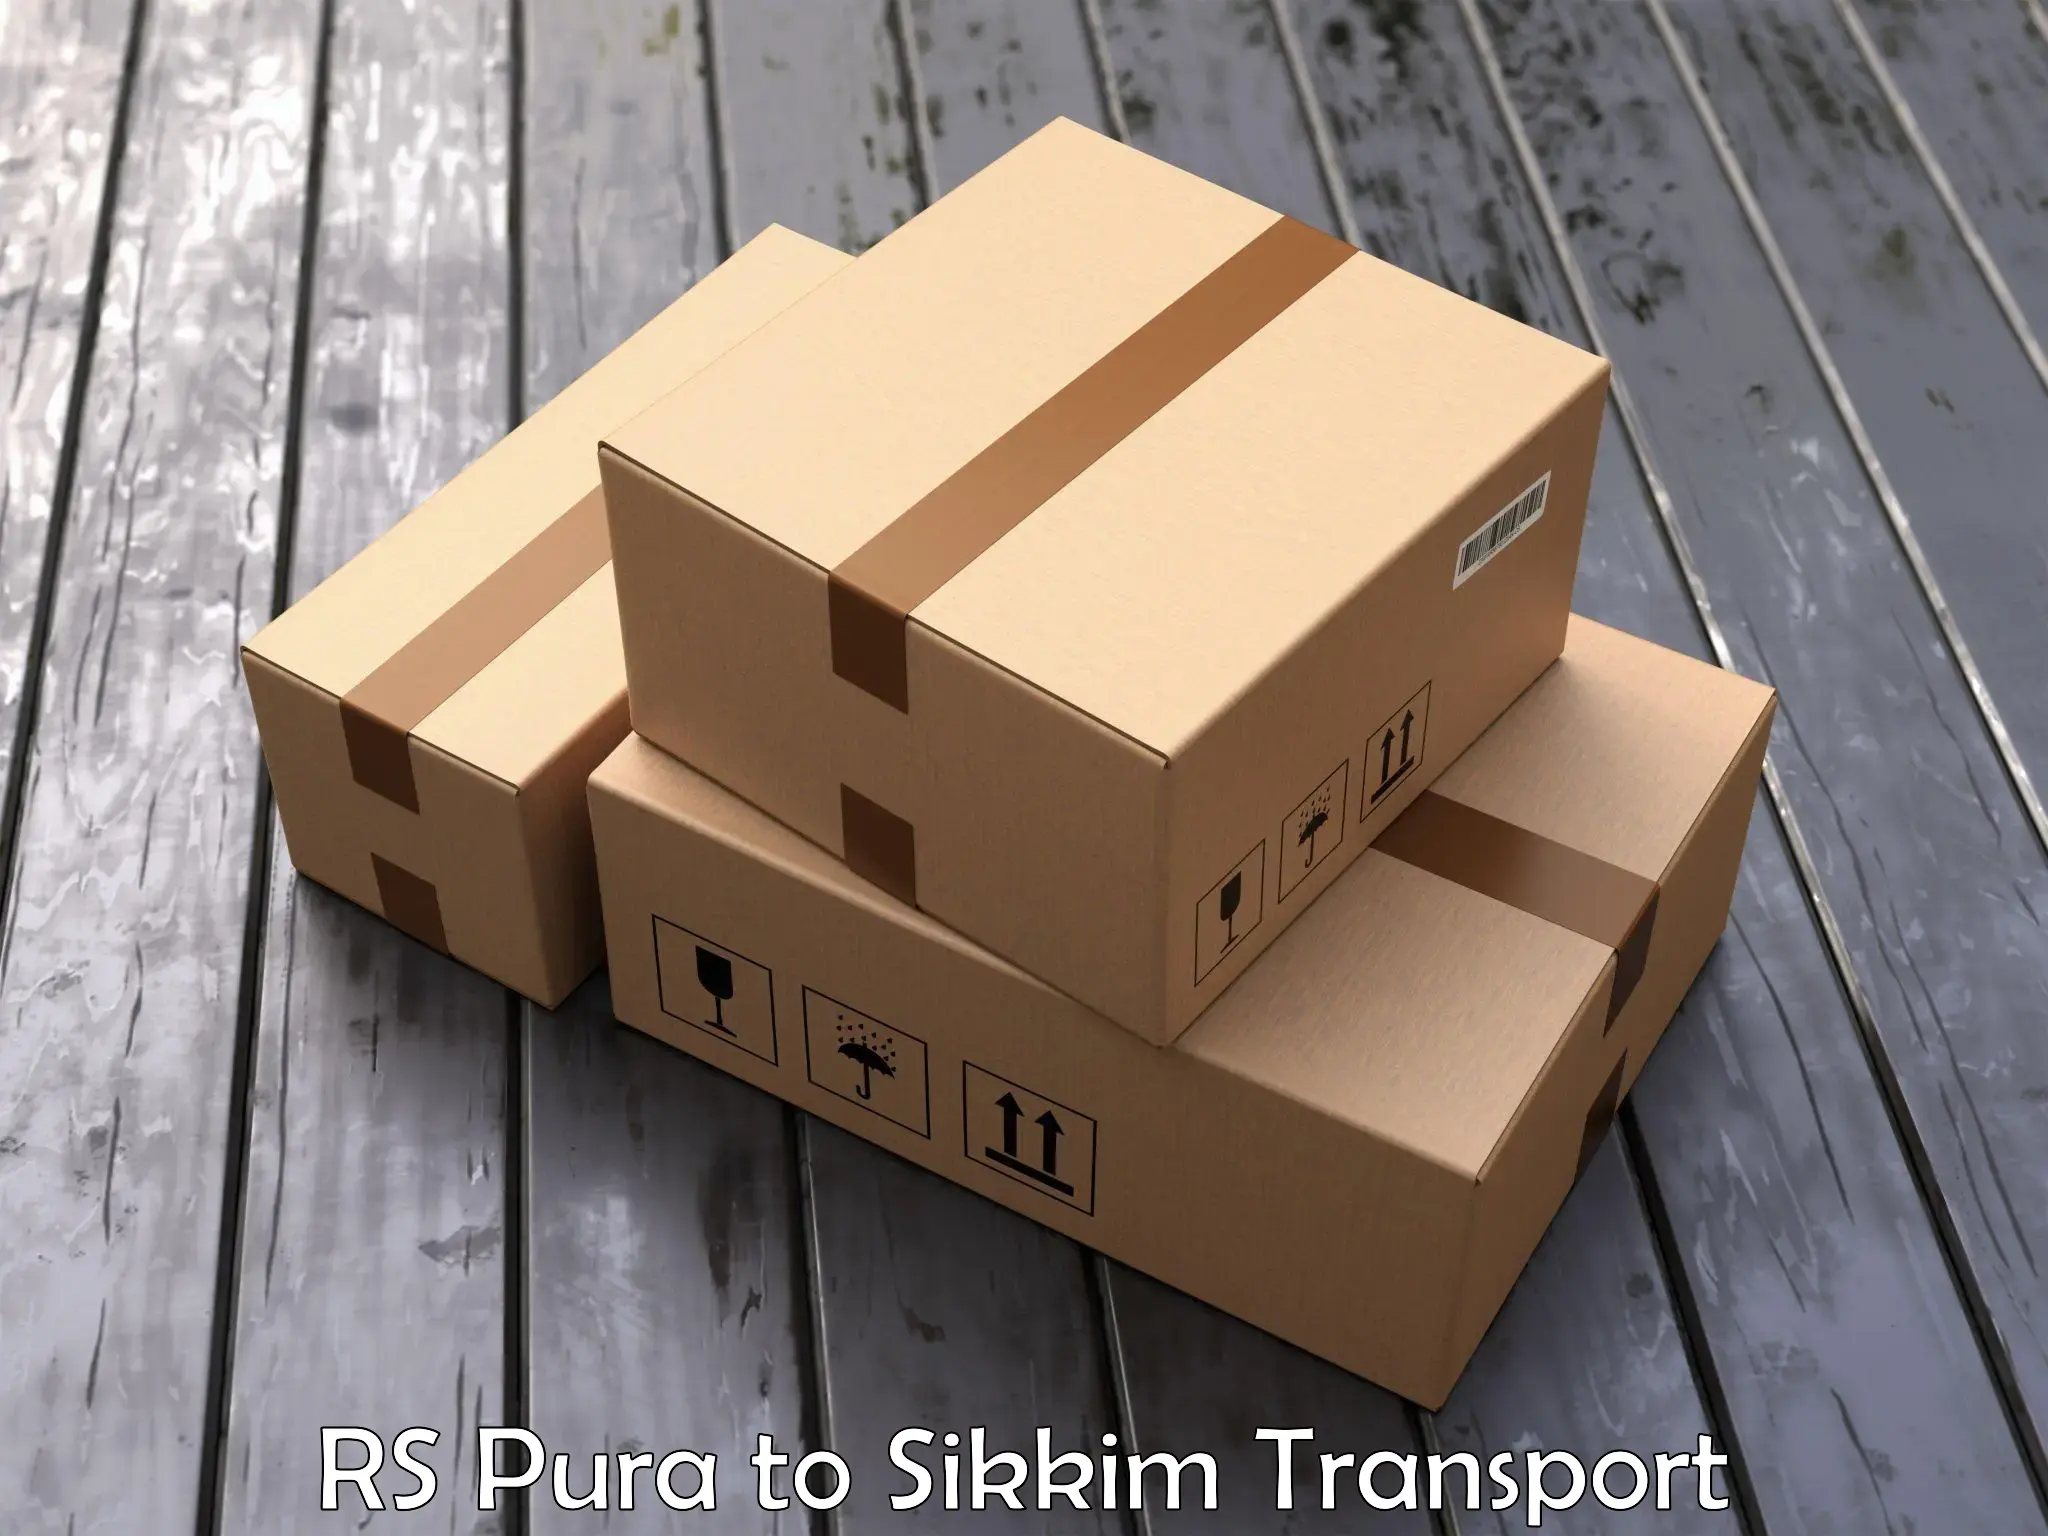 Two wheeler transport services RS Pura to Sikkim